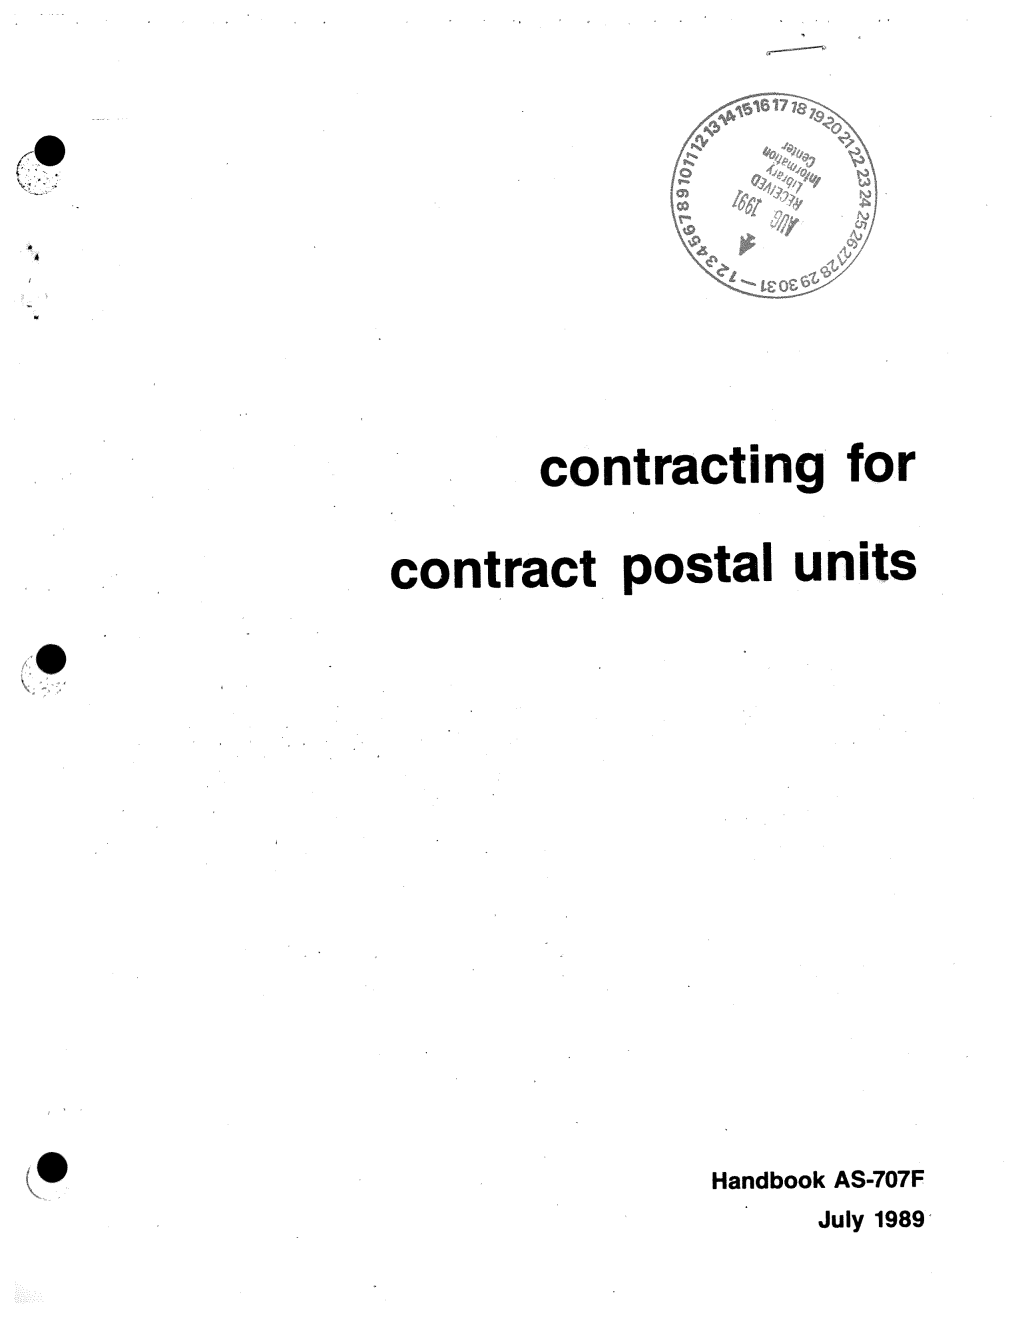 AS-707-F: Contracting for Contract Postal Units